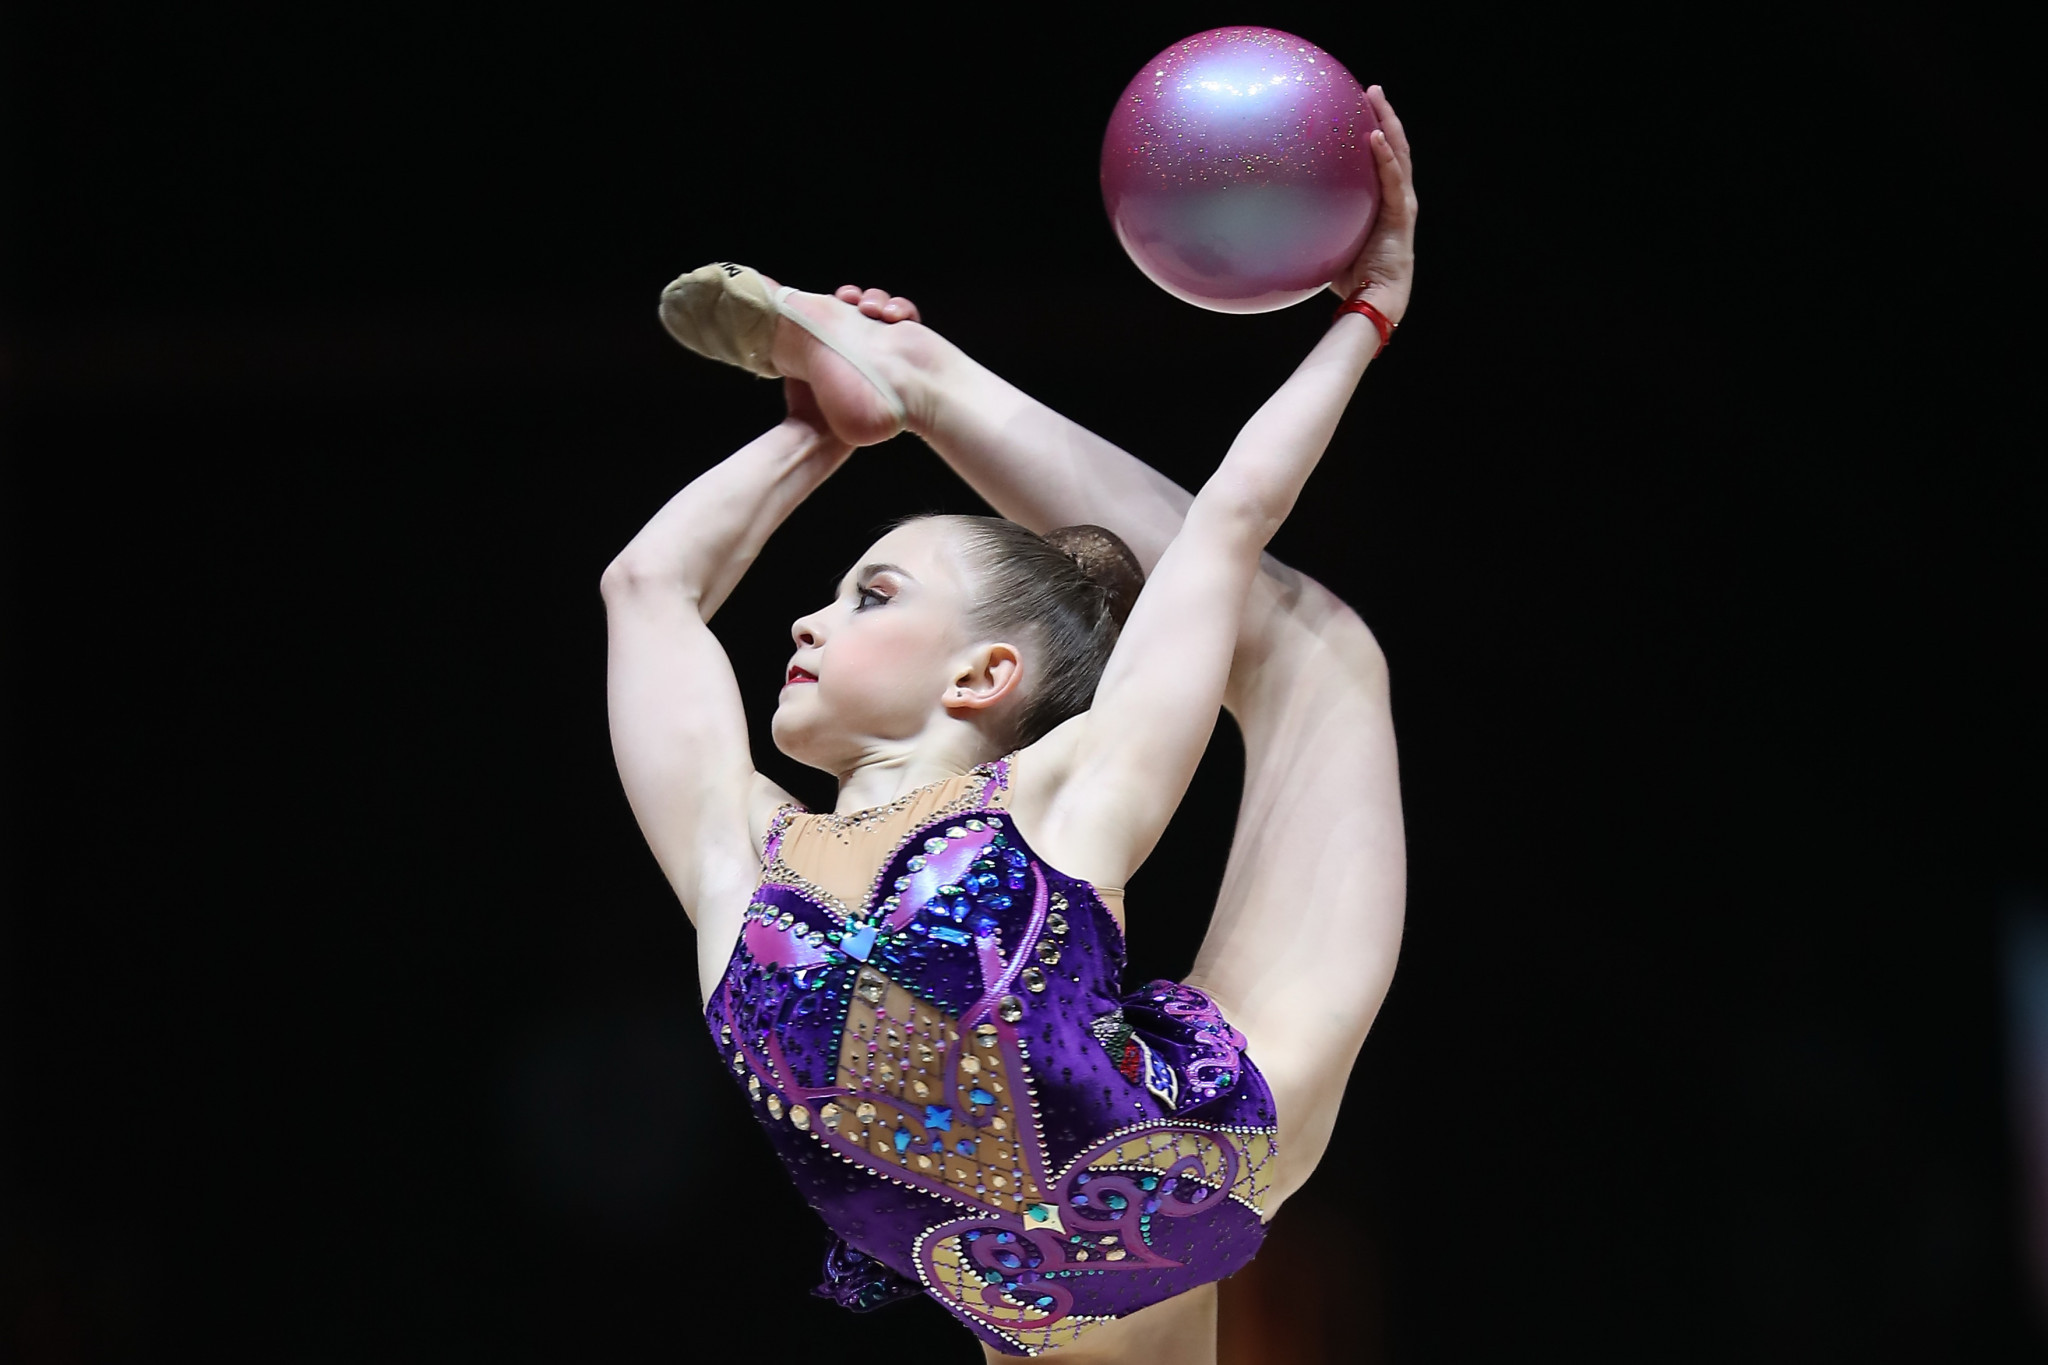 Bulgarian gymnasts stand out during ball and hoop qualifiers in Baku